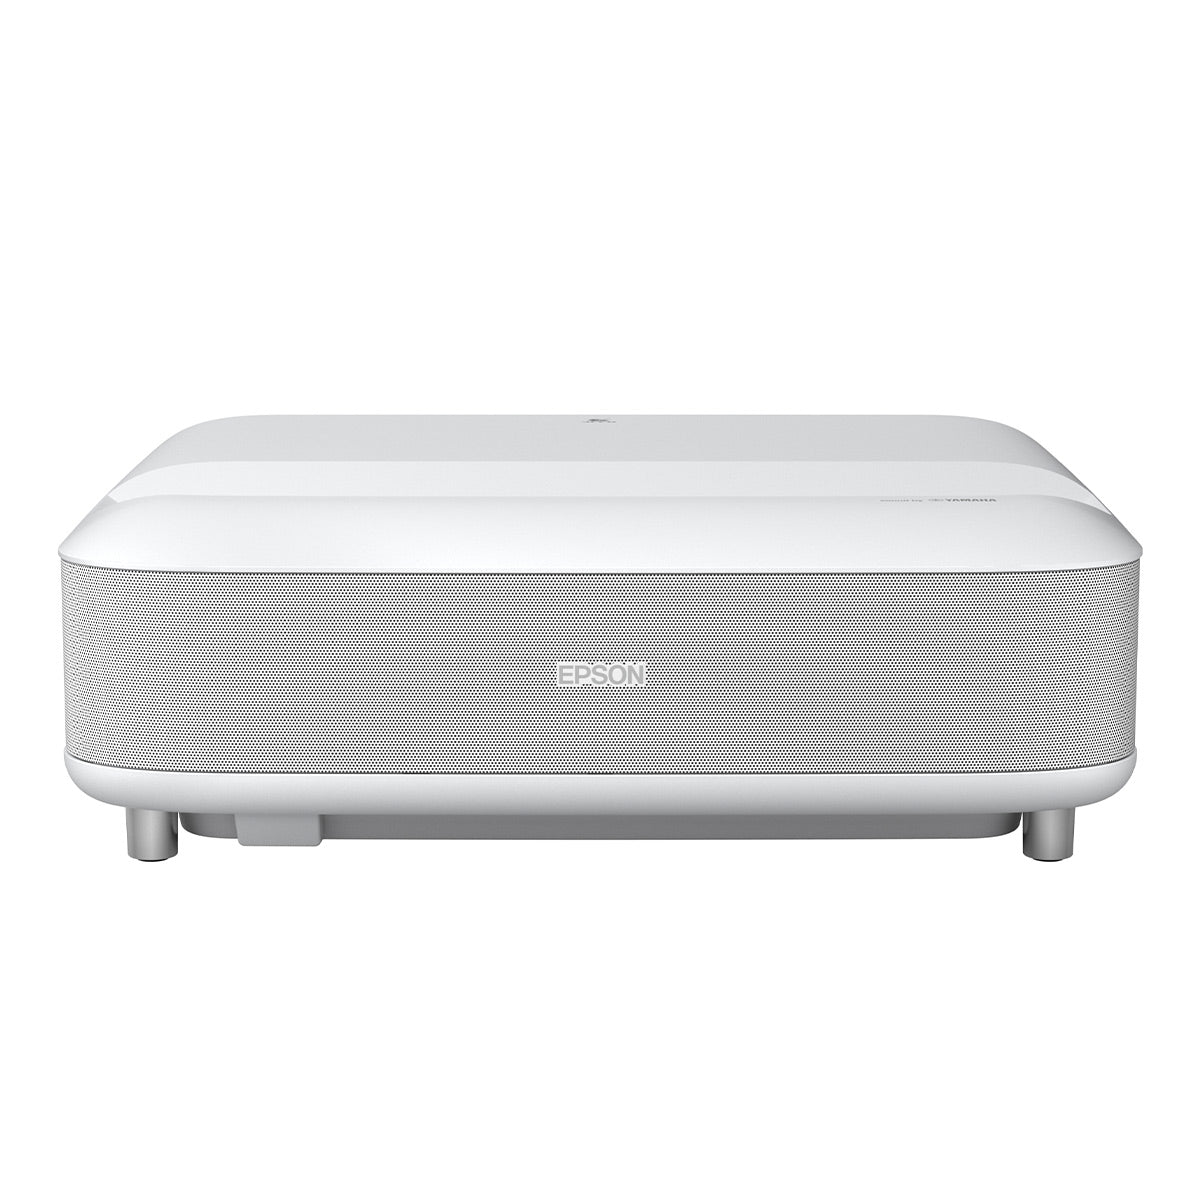 Epson LS650 EpiqVision Ultra Short-Throw Laser Projector with Smart Streaming (White))